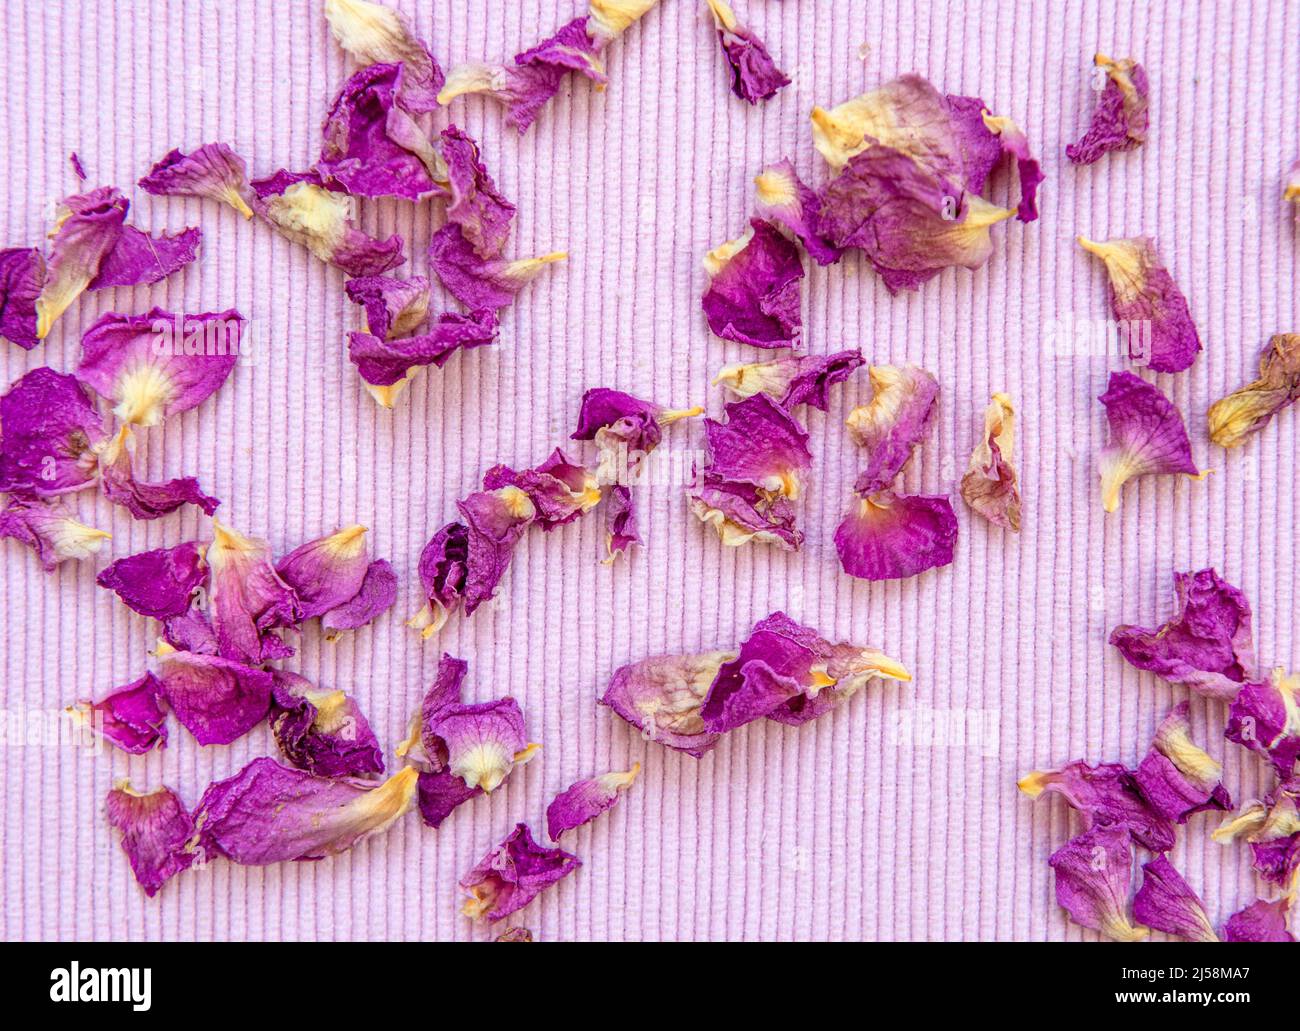 Dried Organic Rose Petals on pink background Stock Photo